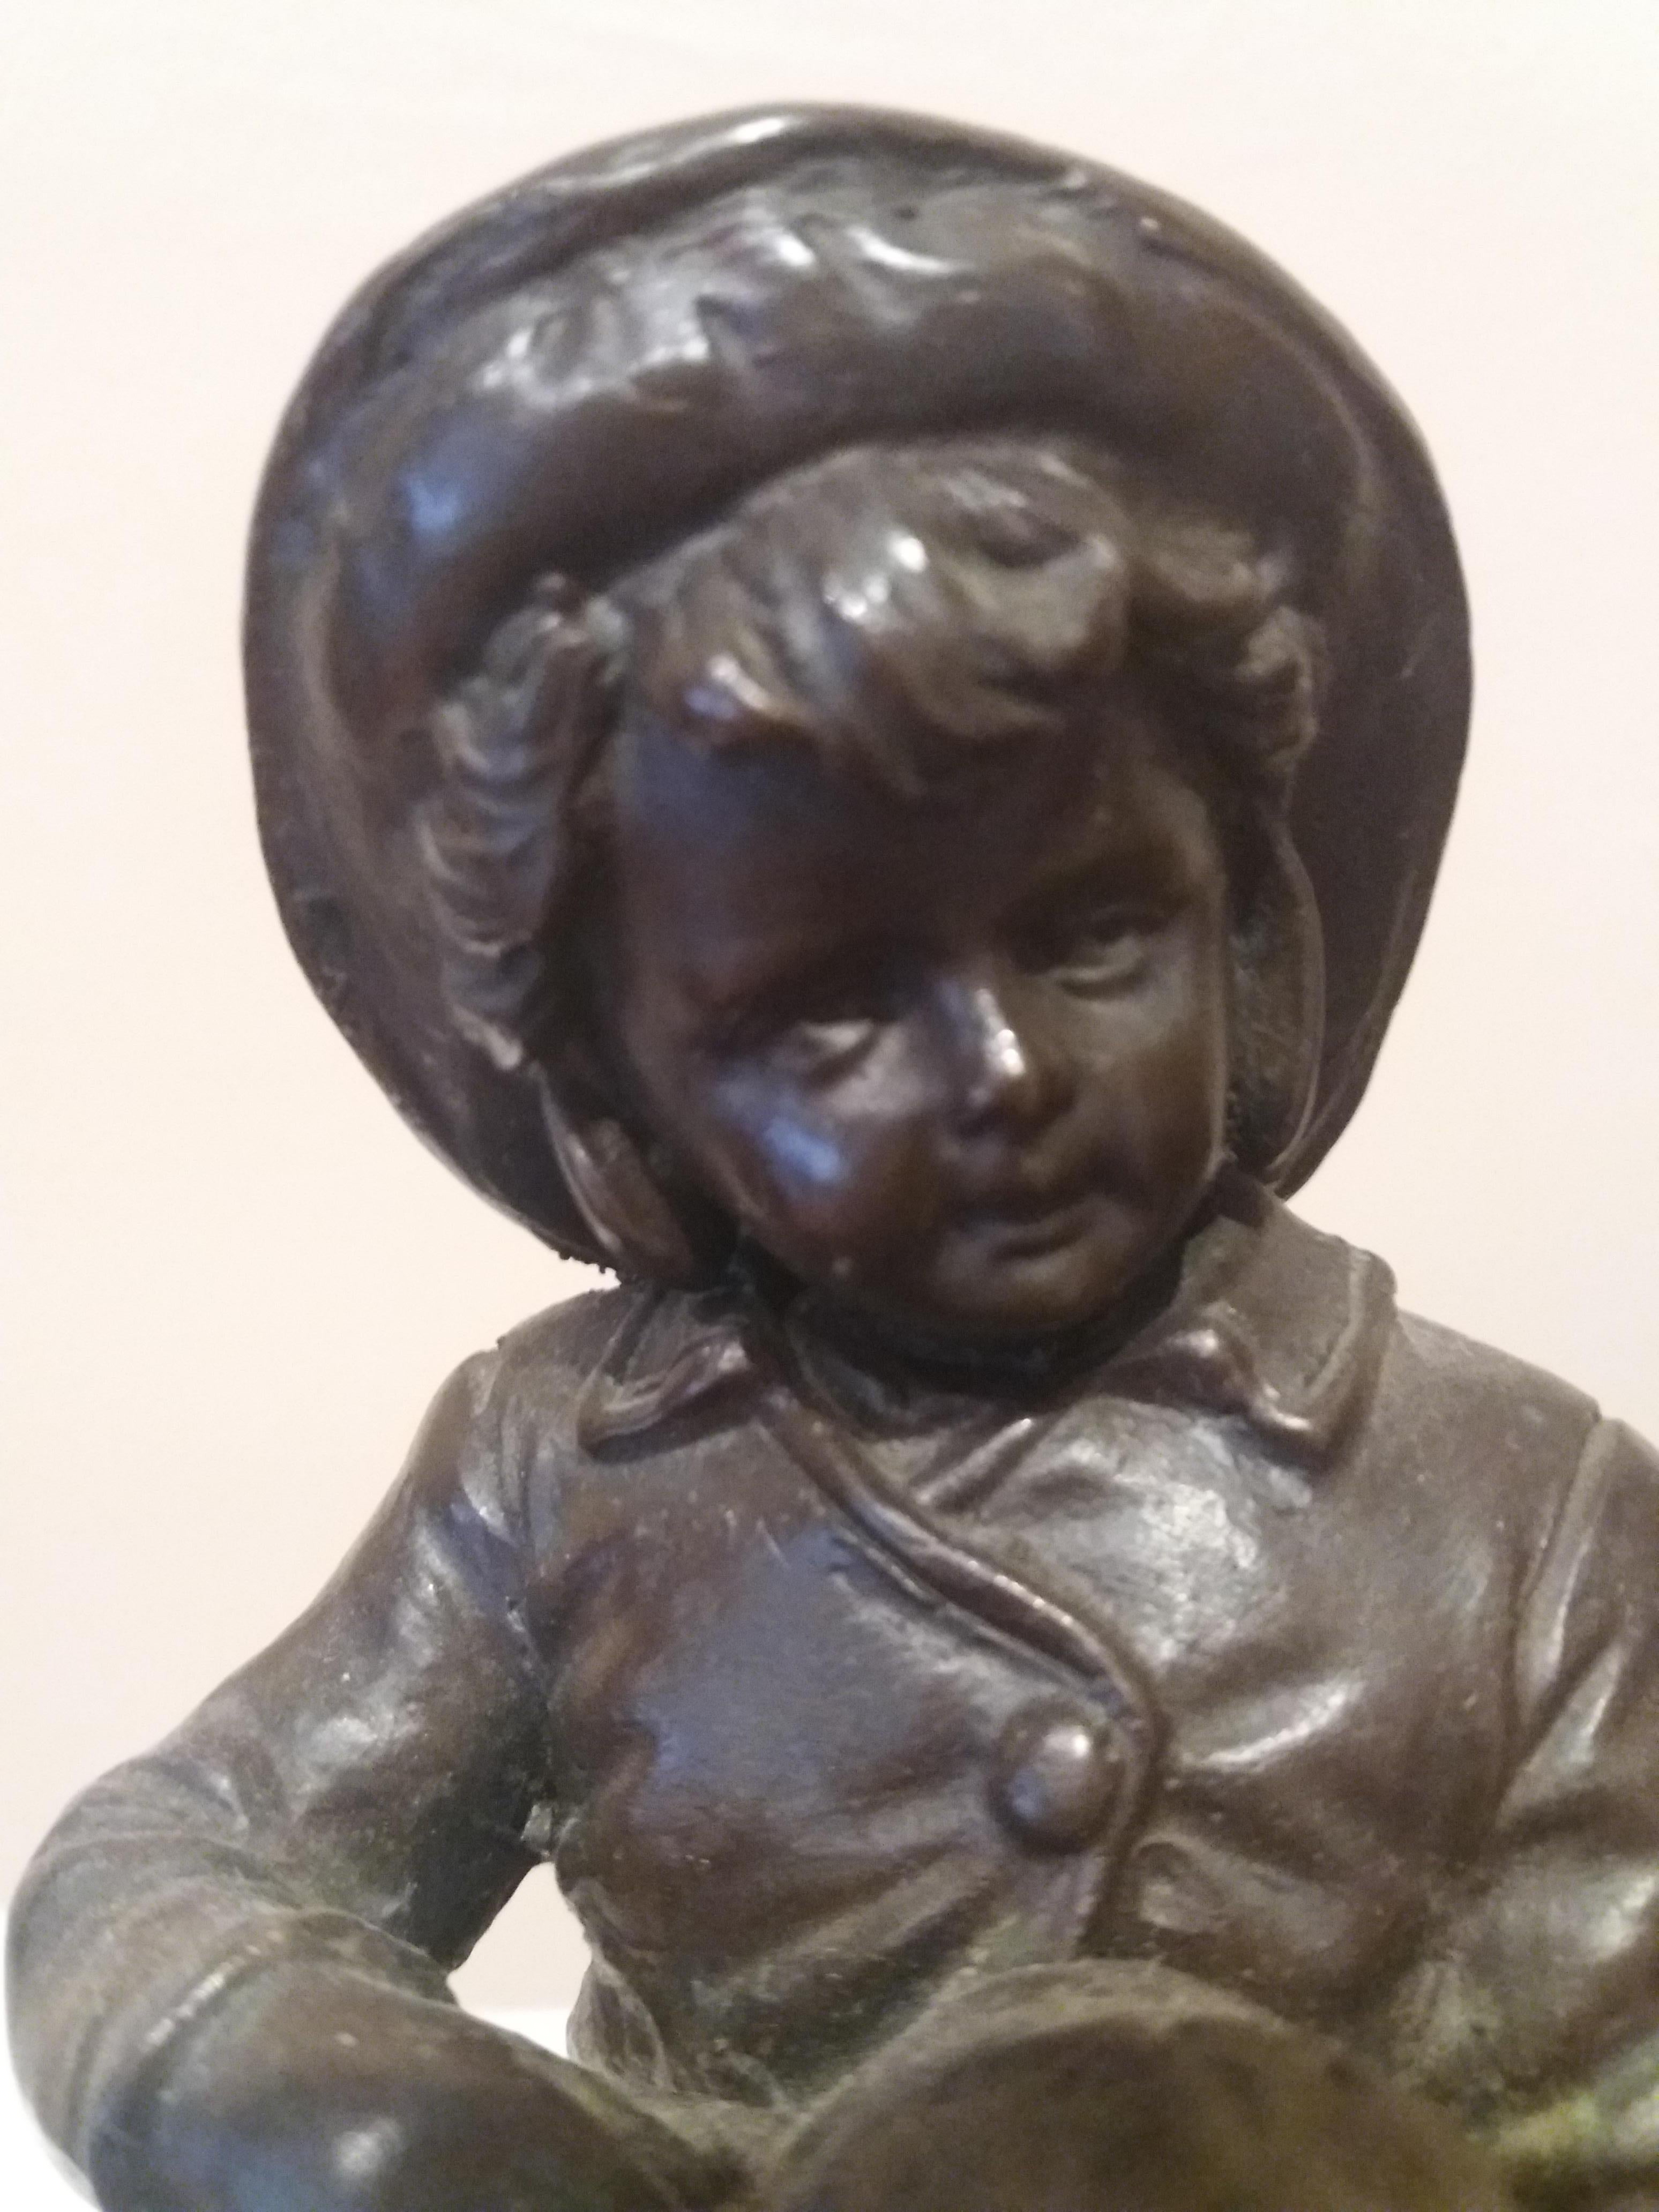  Bollel  Child and conch shell. Original multiple bronze sculpture - Sculpture by BOLLEL